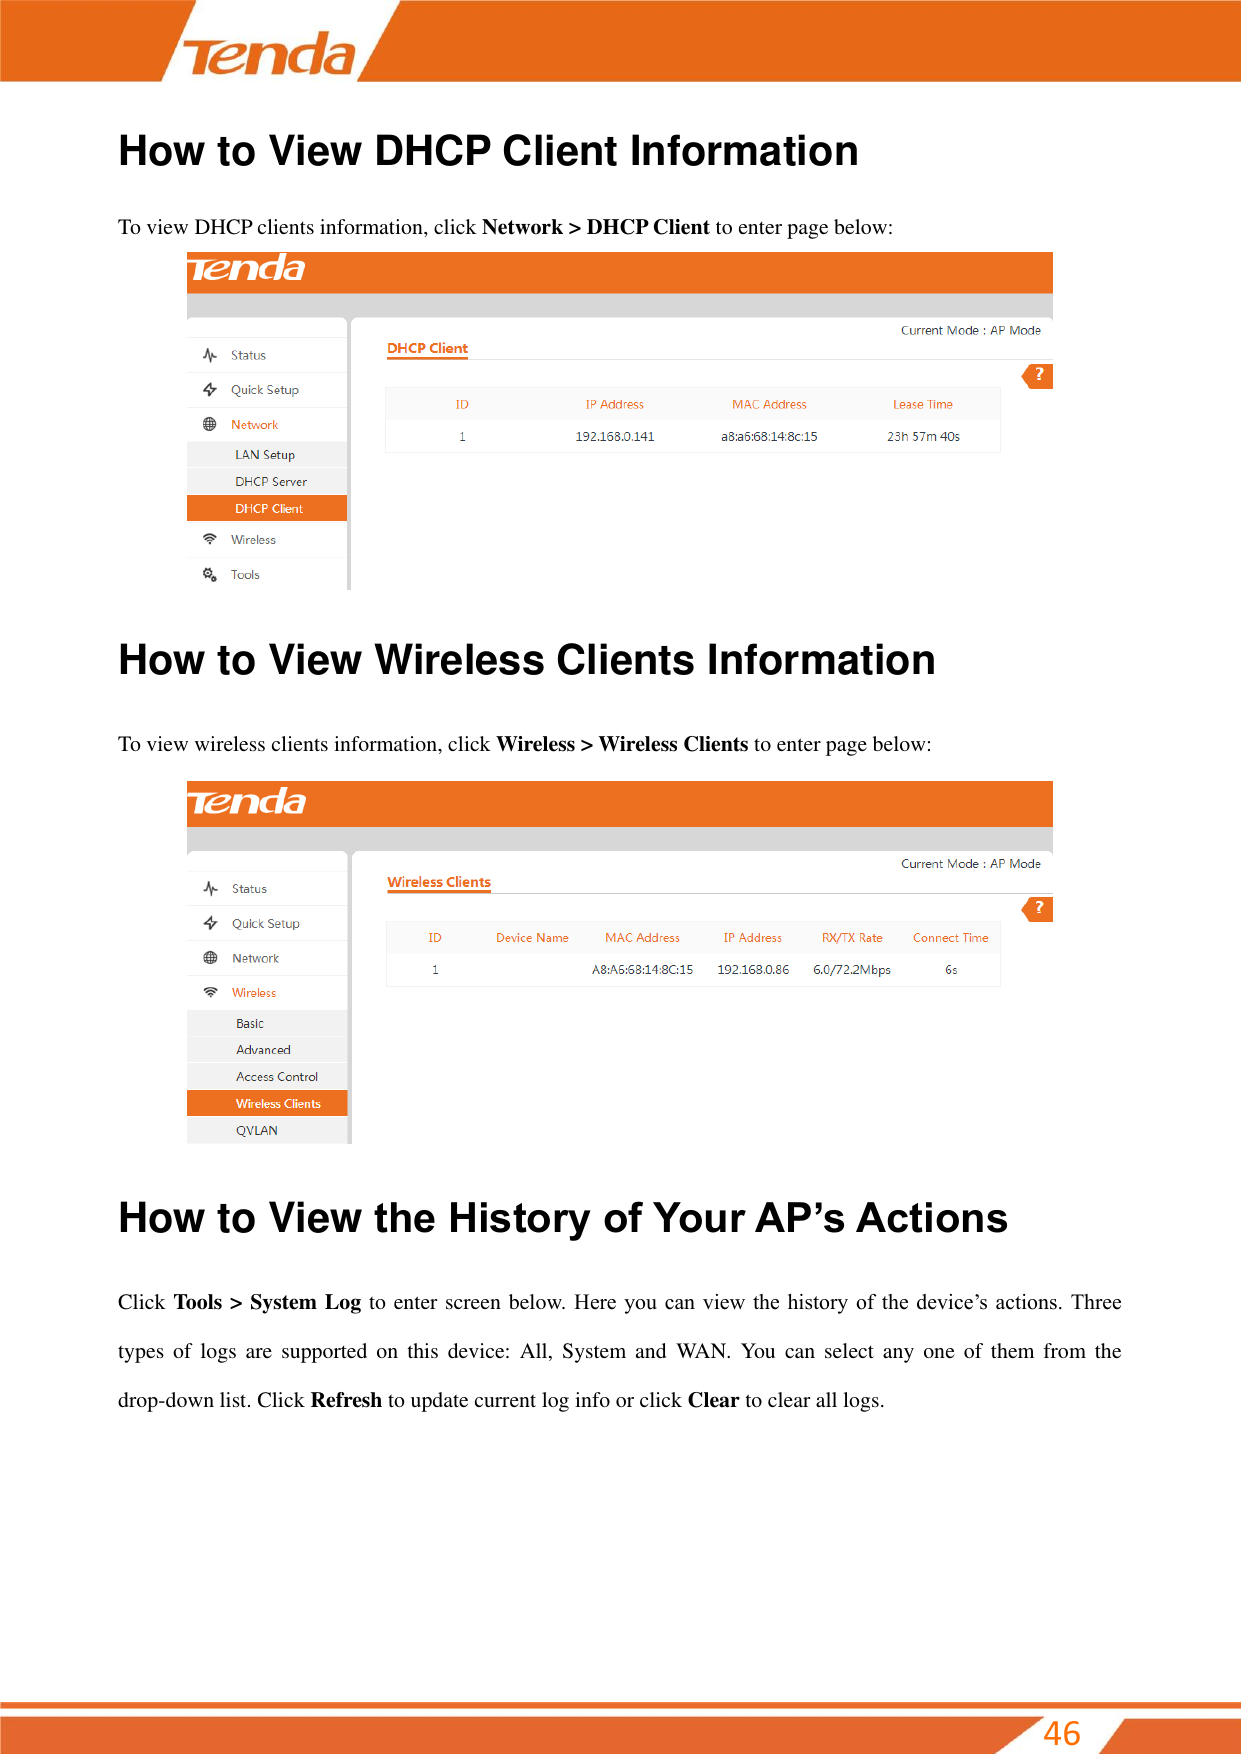         46 How to View DHCP Client Information To view DHCP clients information, click Network &gt; DHCP Client to enter page below:  How to View Wireless Clients Information To view wireless clients information, click Wireless &gt; Wireless Clients to enter page below:  How to View the History of Your AP’s Actions Click Tools &gt; System Log to enter screen below. Here you can view the  history of the  device’s  actions. Three types  of  logs  are  supported on  this  device:  All,  System  and  WAN.  You  can  select  any  one  of them from  the drop-down list. Click Refresh to update current log info or click Clear to clear all logs. 